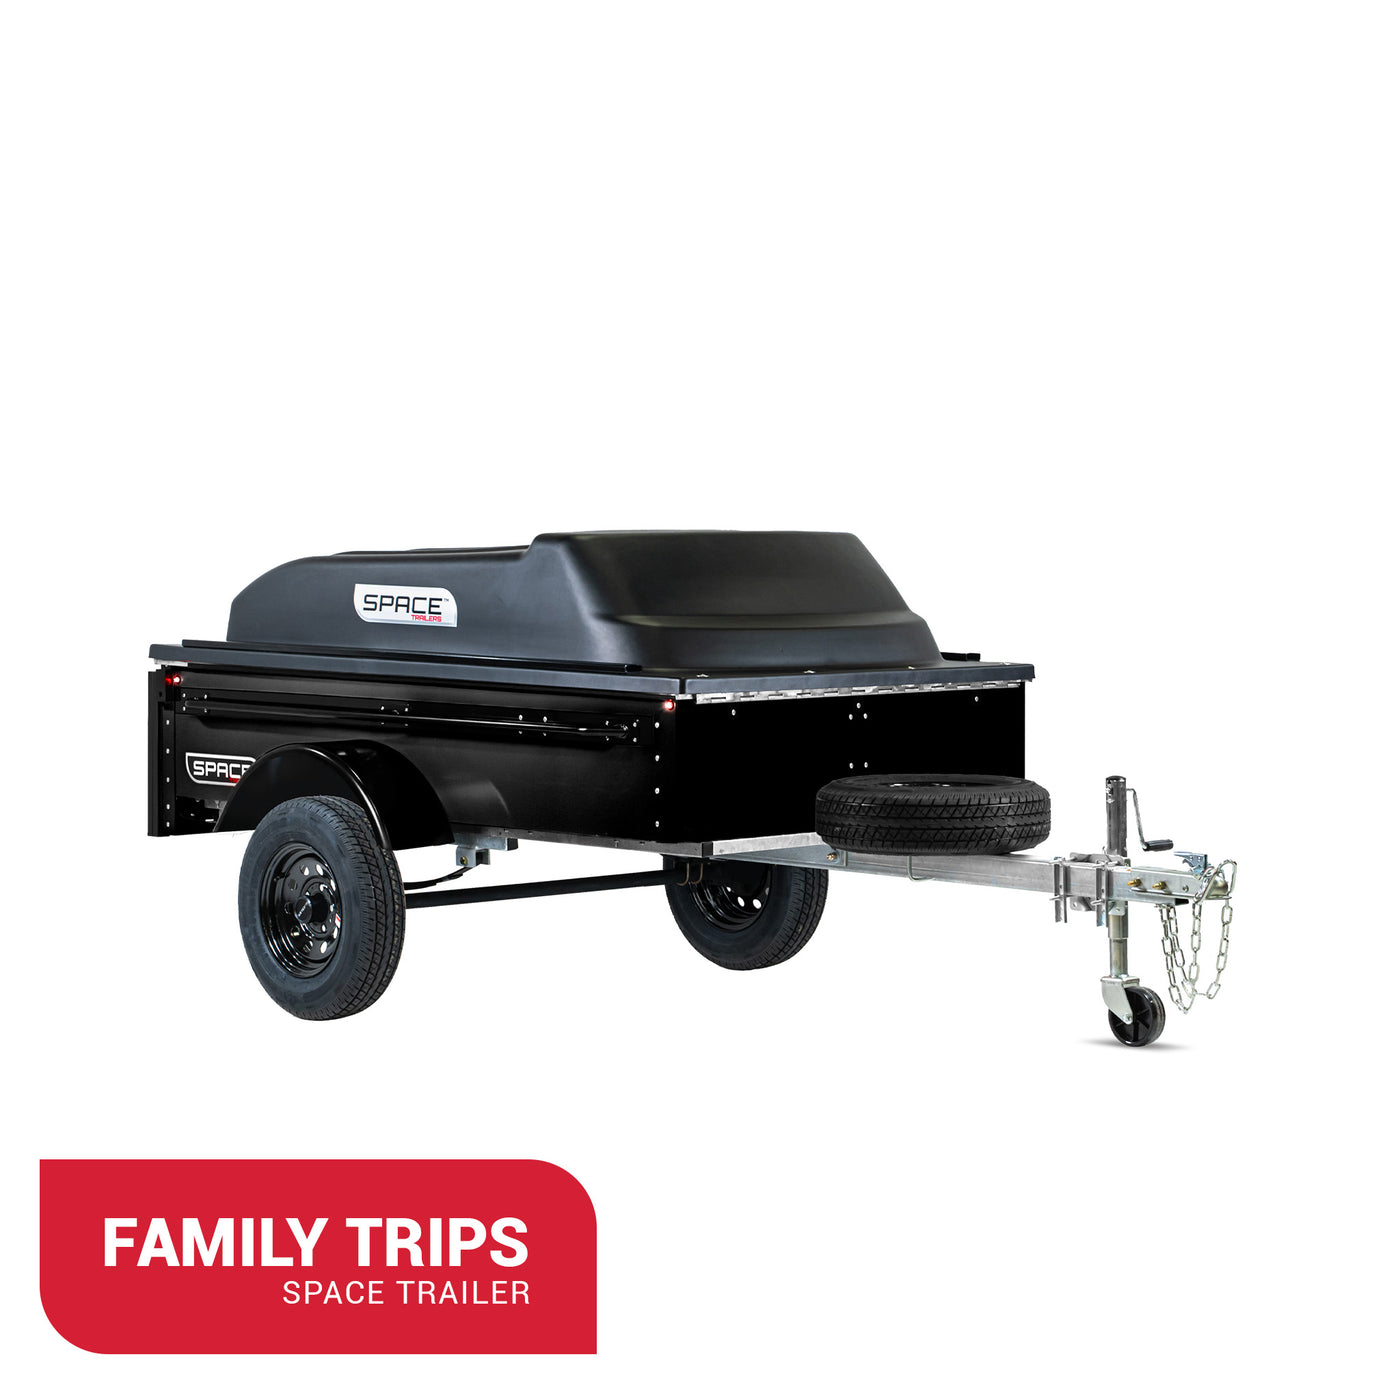 SPACE Trailer - Sport Utility Trailer - Sleek and lightweight great for road trips